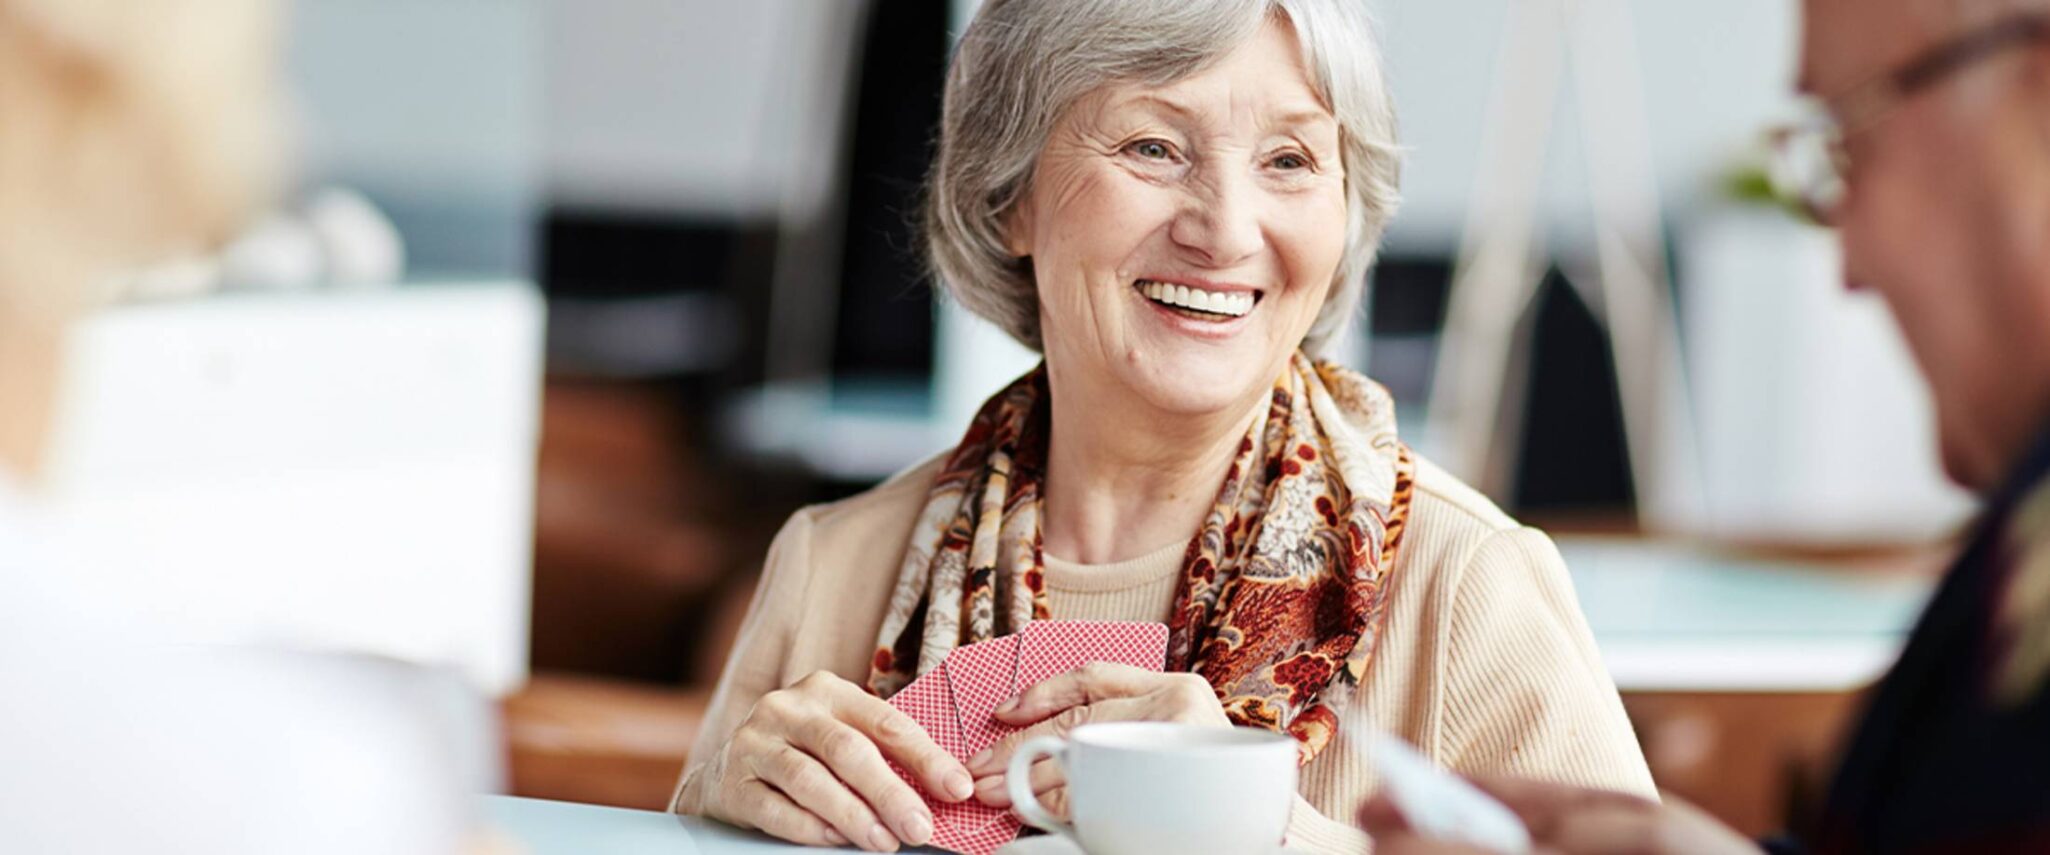 elderly woman playing cards with senior friends drinking coffee